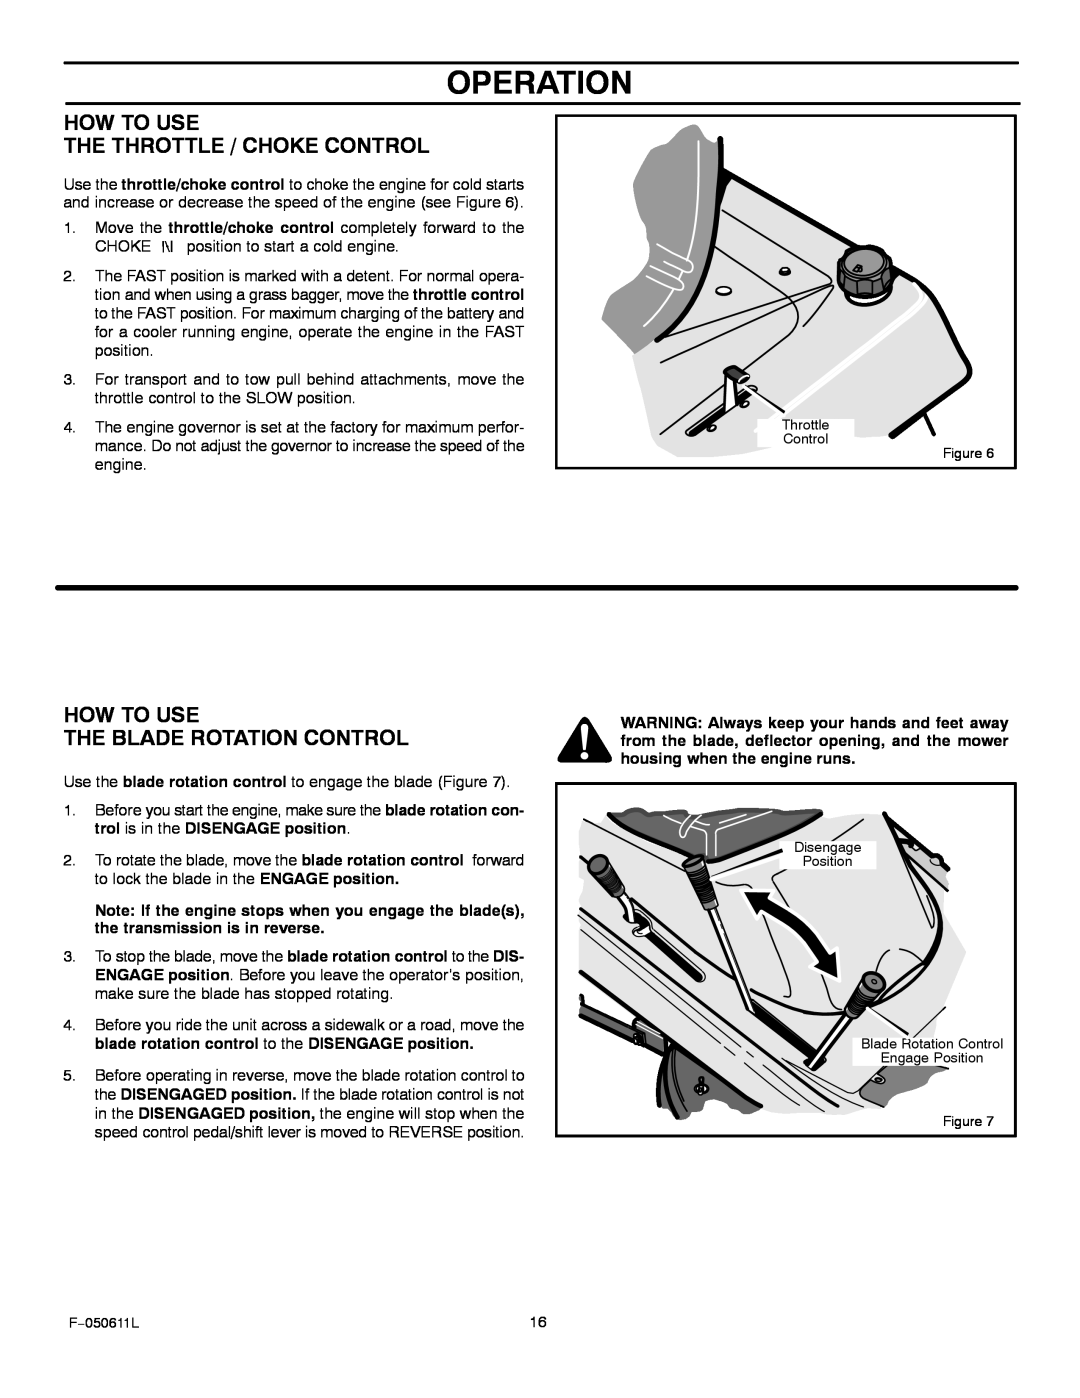 Murray 309007x8B manual How To Use The Throttle / Choke Control, How To Use The Blade Rotation Control, Operation 